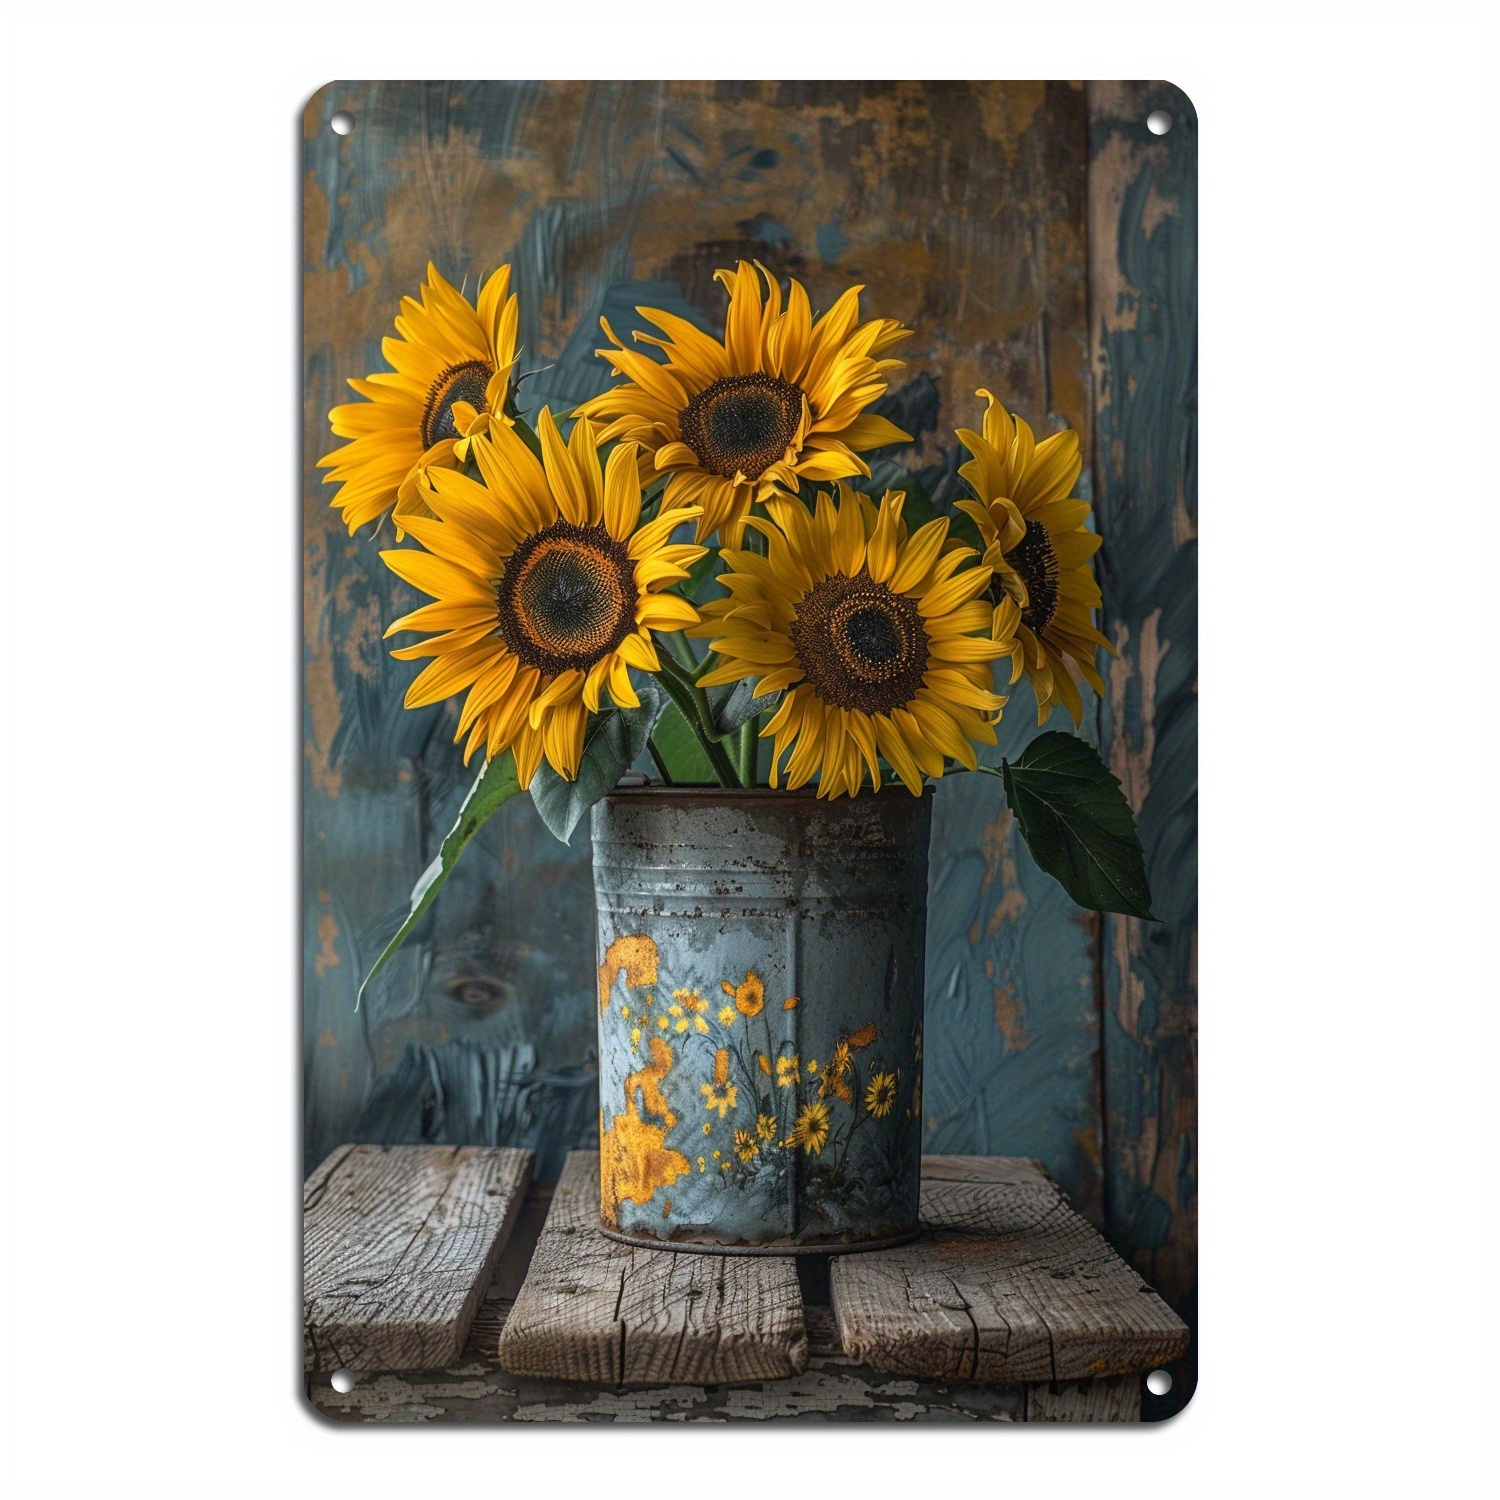 

Yellow Sunflower Vintage Metal Tin Sign, Farmhouse Kitchen Wall Home Decor, Coffee Bar Signs Gifts Garden Decoration 8x12inch